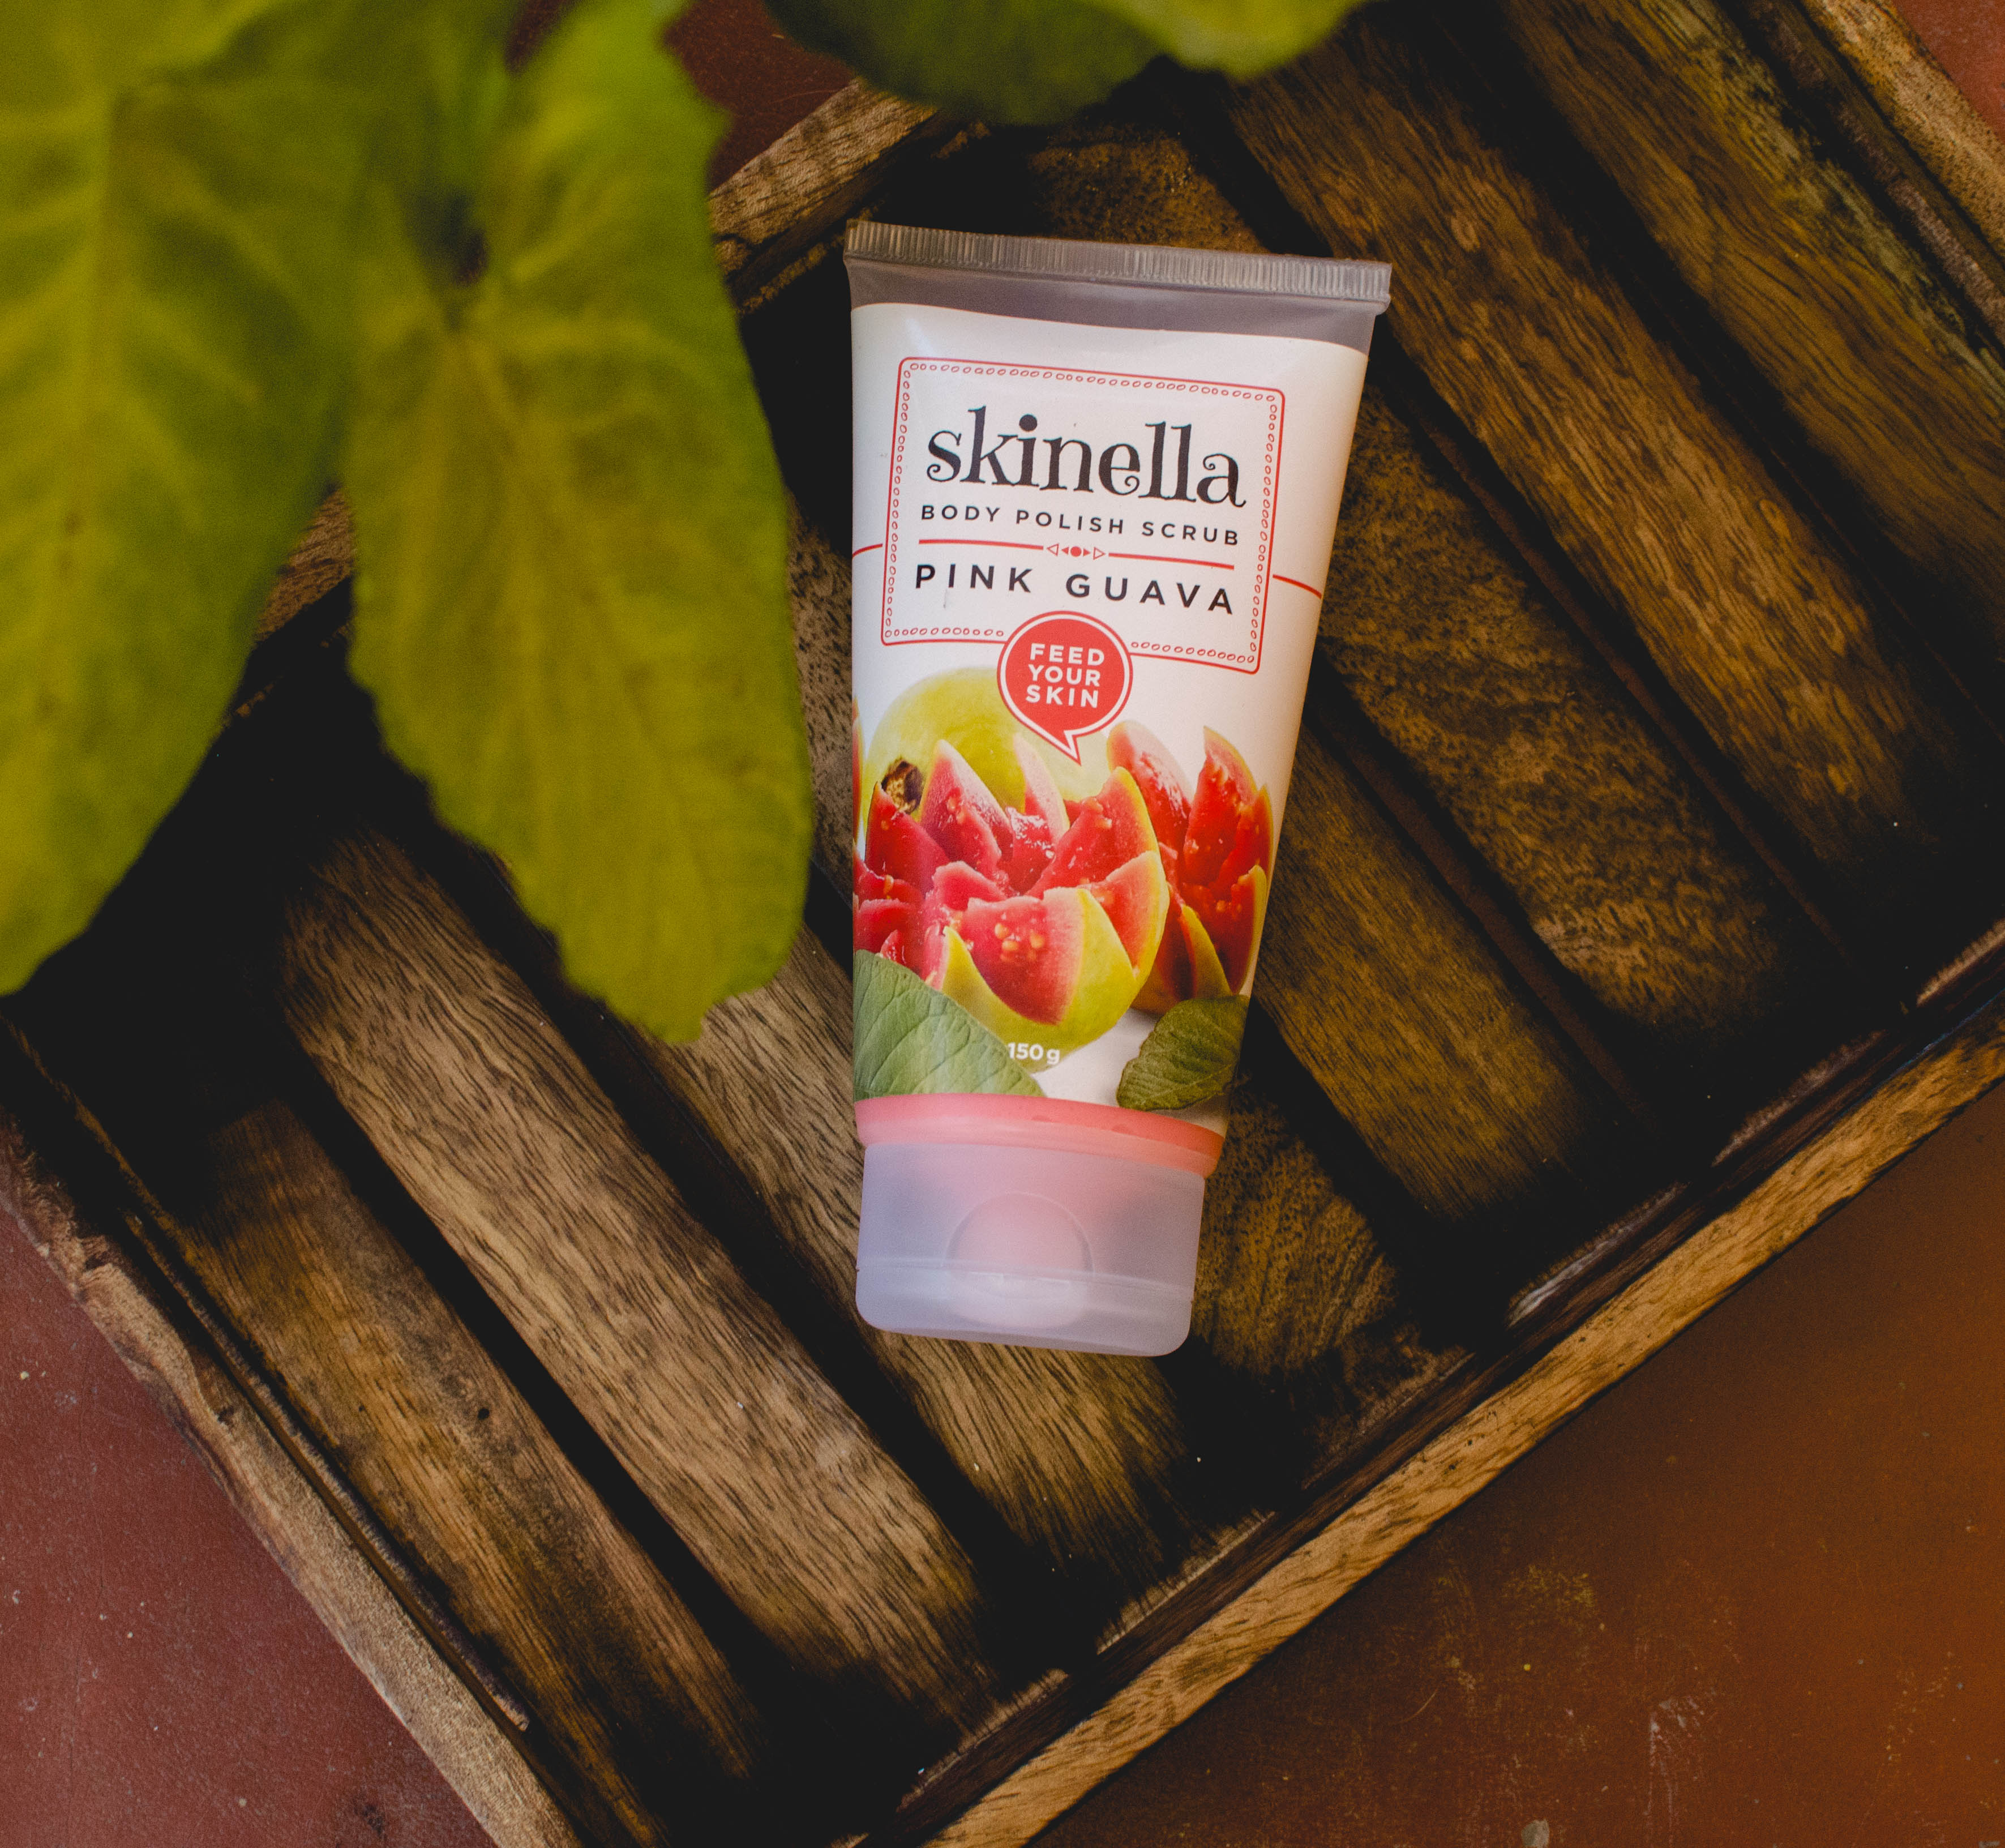 Summer Shower Routine Ft Skinella | Cherry On Top | Skinella Mandarin Gel Body Wash review | Skinella Pink Guava Body Polish Scrub review| Skinella Products Review